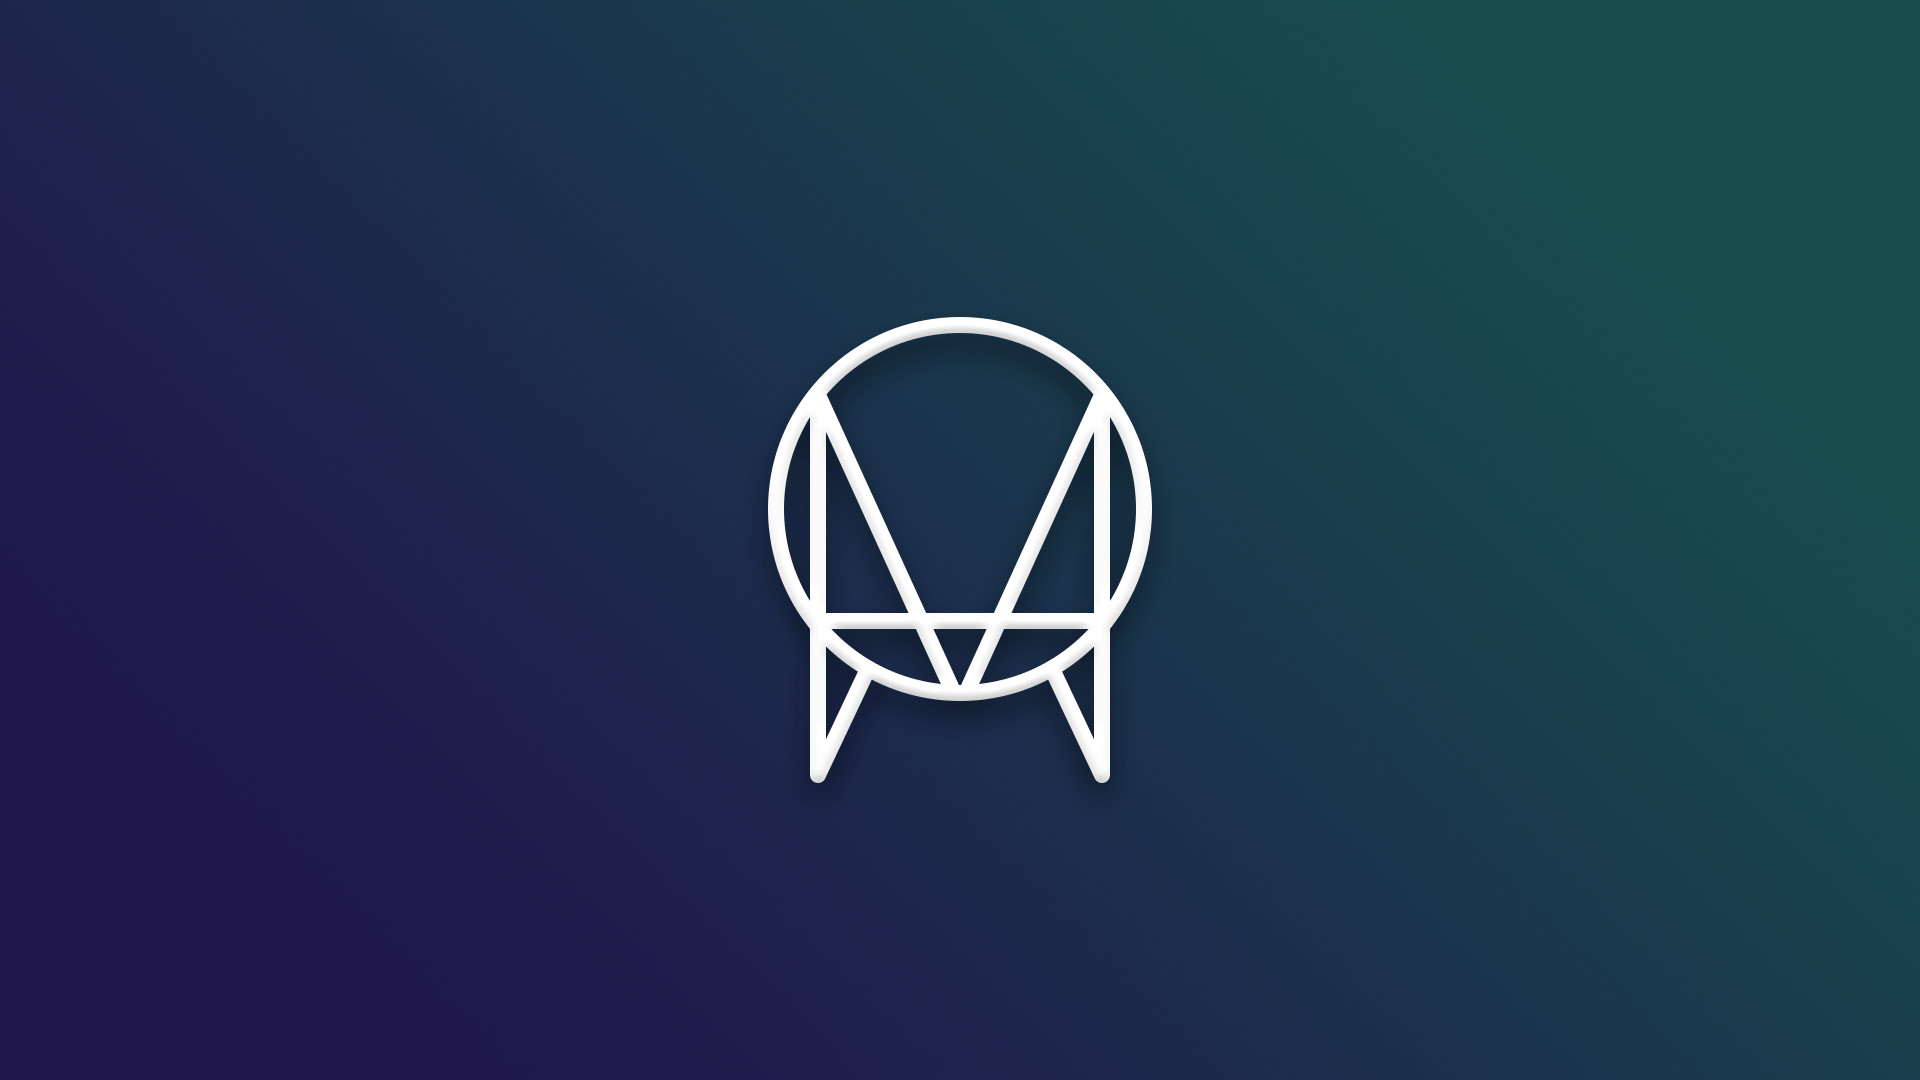 1920x1080 OWSLA Wallpapers (HD & 4K & Mobile) - Album on Imgur